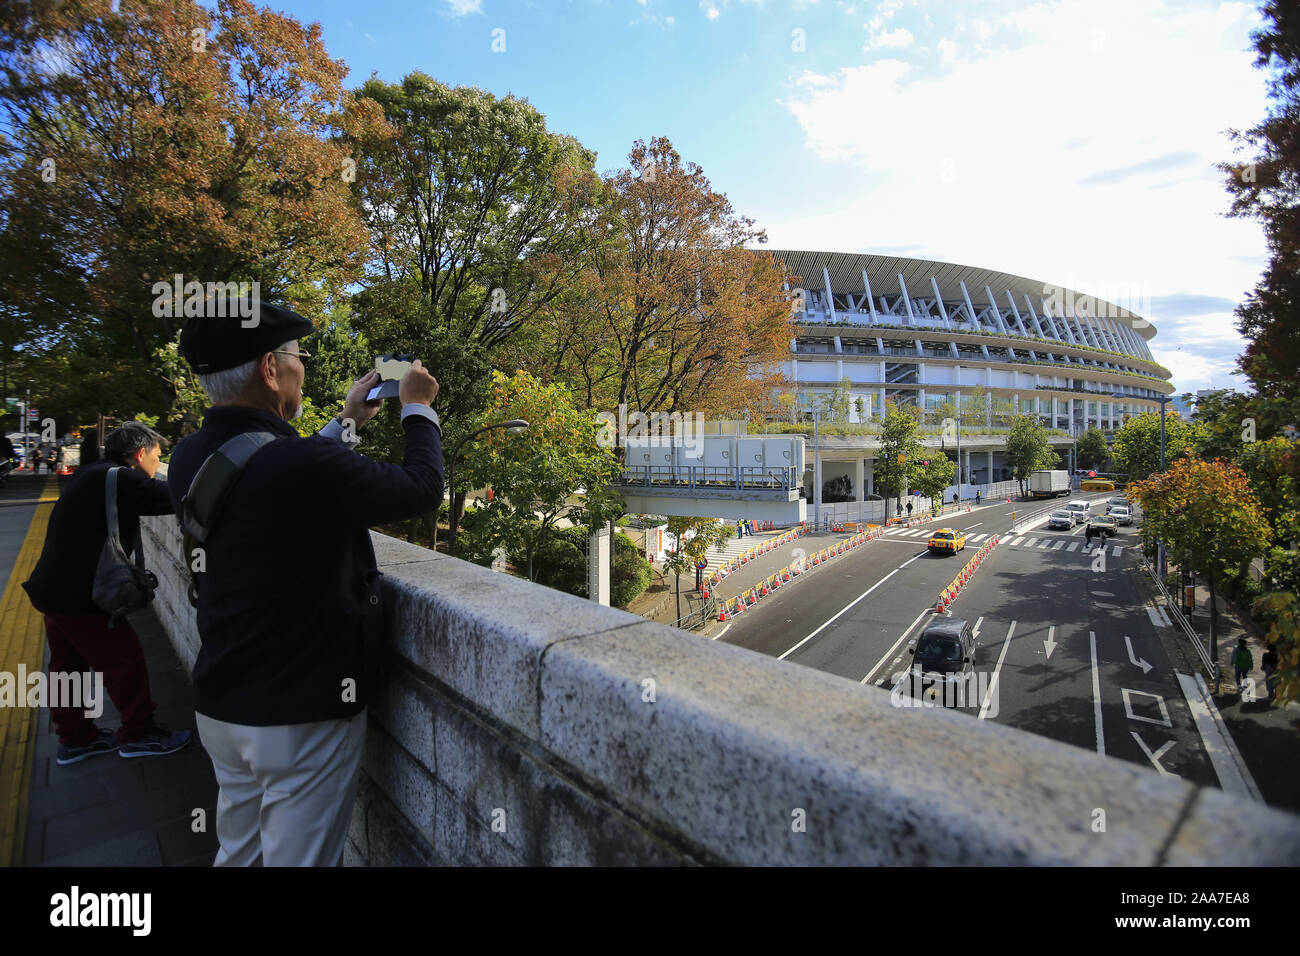 November 20, 2019, Tokyo, Japan: People take pictures of the new National Stadium which construction works has finished, according to the Japan Sport Council (JSC). Yesterday, the JSC announced the new National Stadium's facilities, including the field, seats, and pedestrian decks around the stadium, are completed and ready for council authorities' inspection on November 30. The venue is set to host the Emperor's Cup soccer final on January 1st as a first public sporting event, as well as the opening and closing ceremonies of the Tokyo 2020 Olympic and Paralympic Games. (Credit Image: © Rodrig Stock Photo